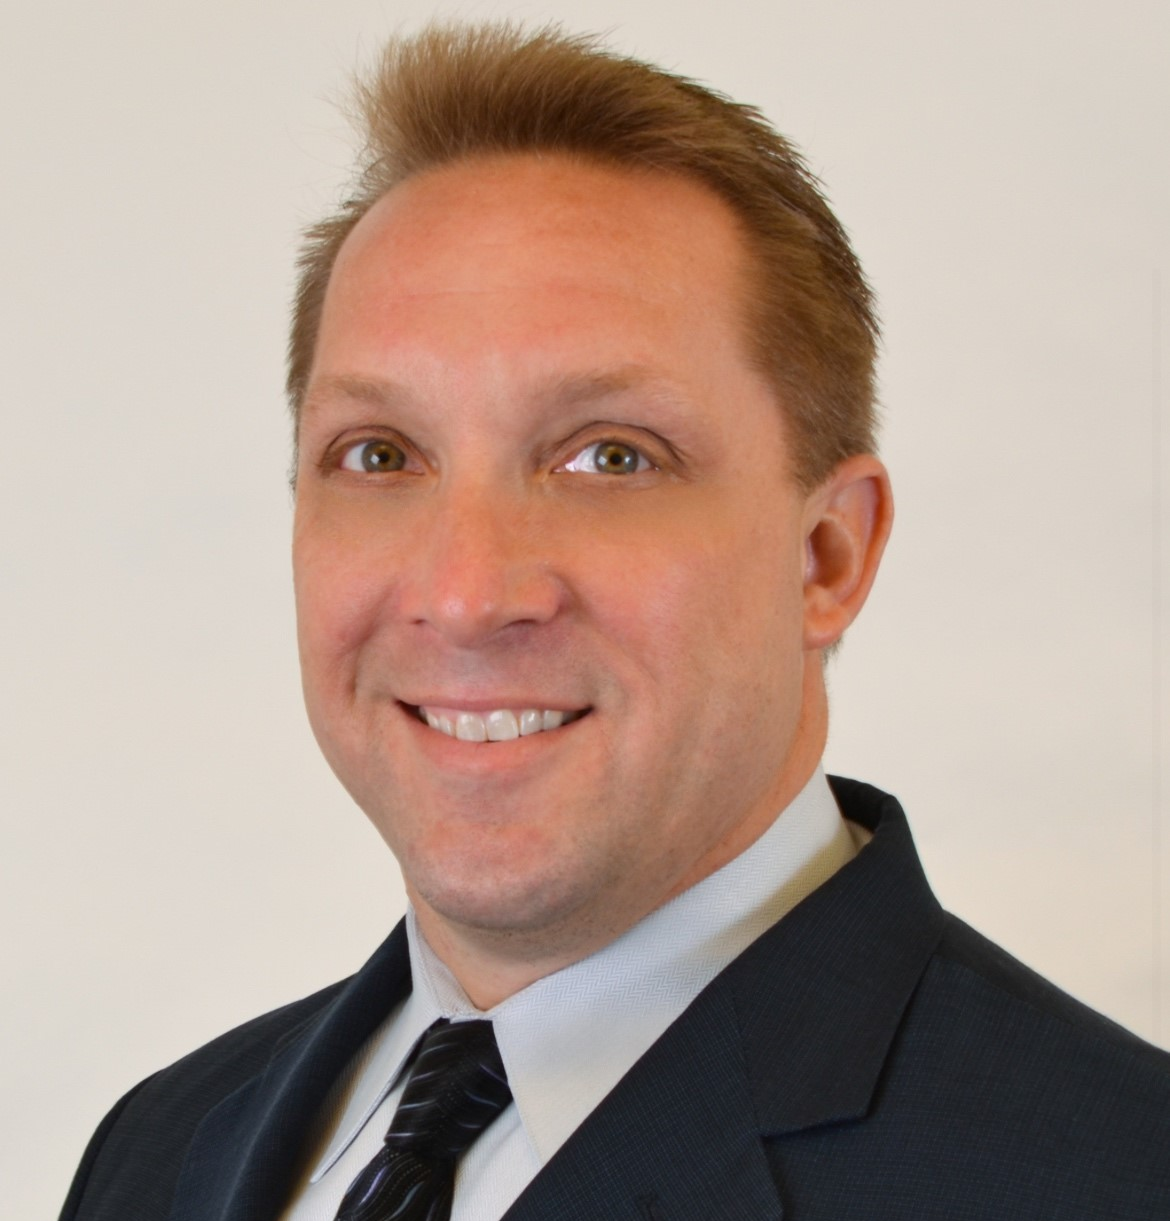 etectRx Welcomes Scott Kozimor as Vice President of Sales, Driving Innovation in Long-Term Care Technology